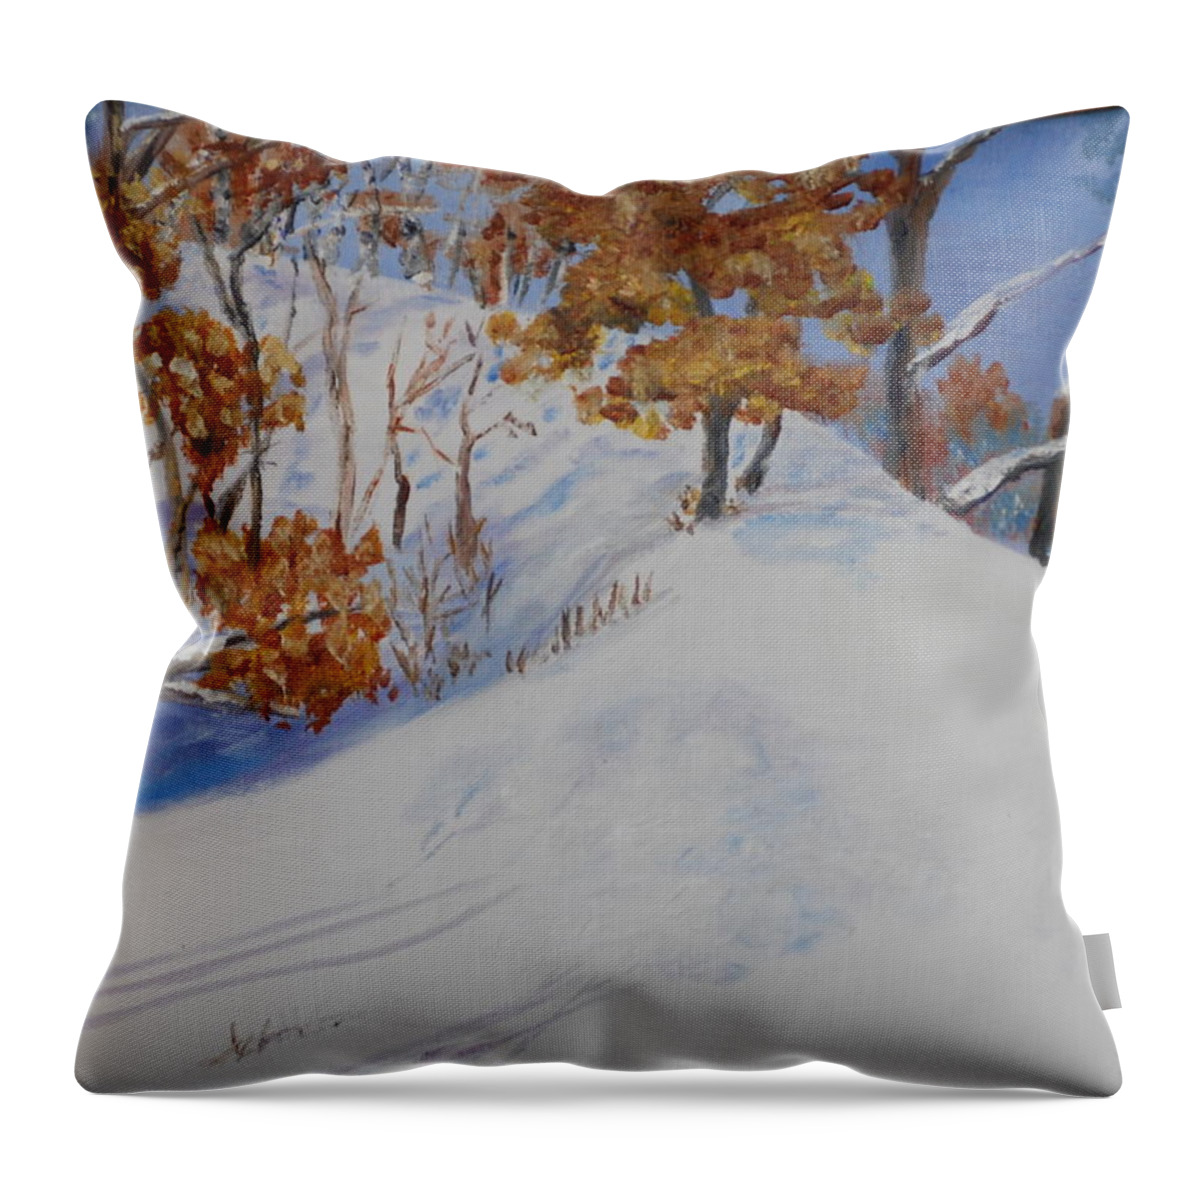 Winter Landscape Throw Pillow featuring the painting Winter Ridge by Phil Burton